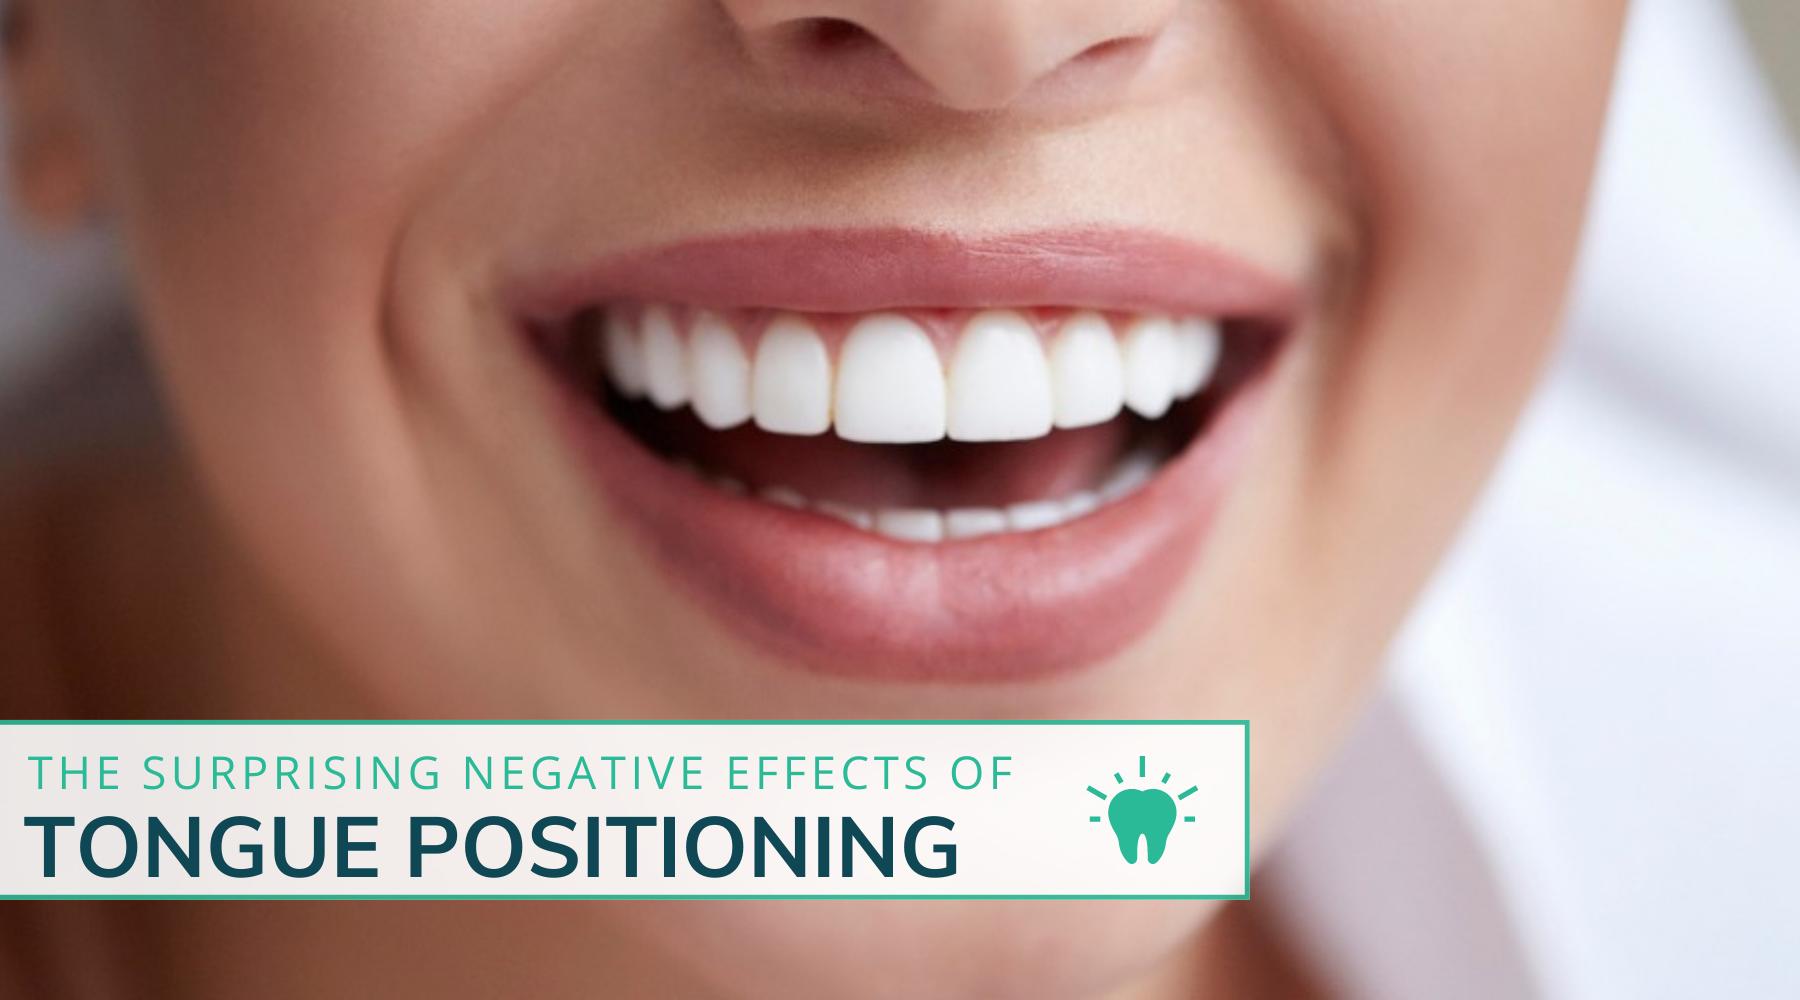 The Surprising Negative Effects of Tongue Positioning